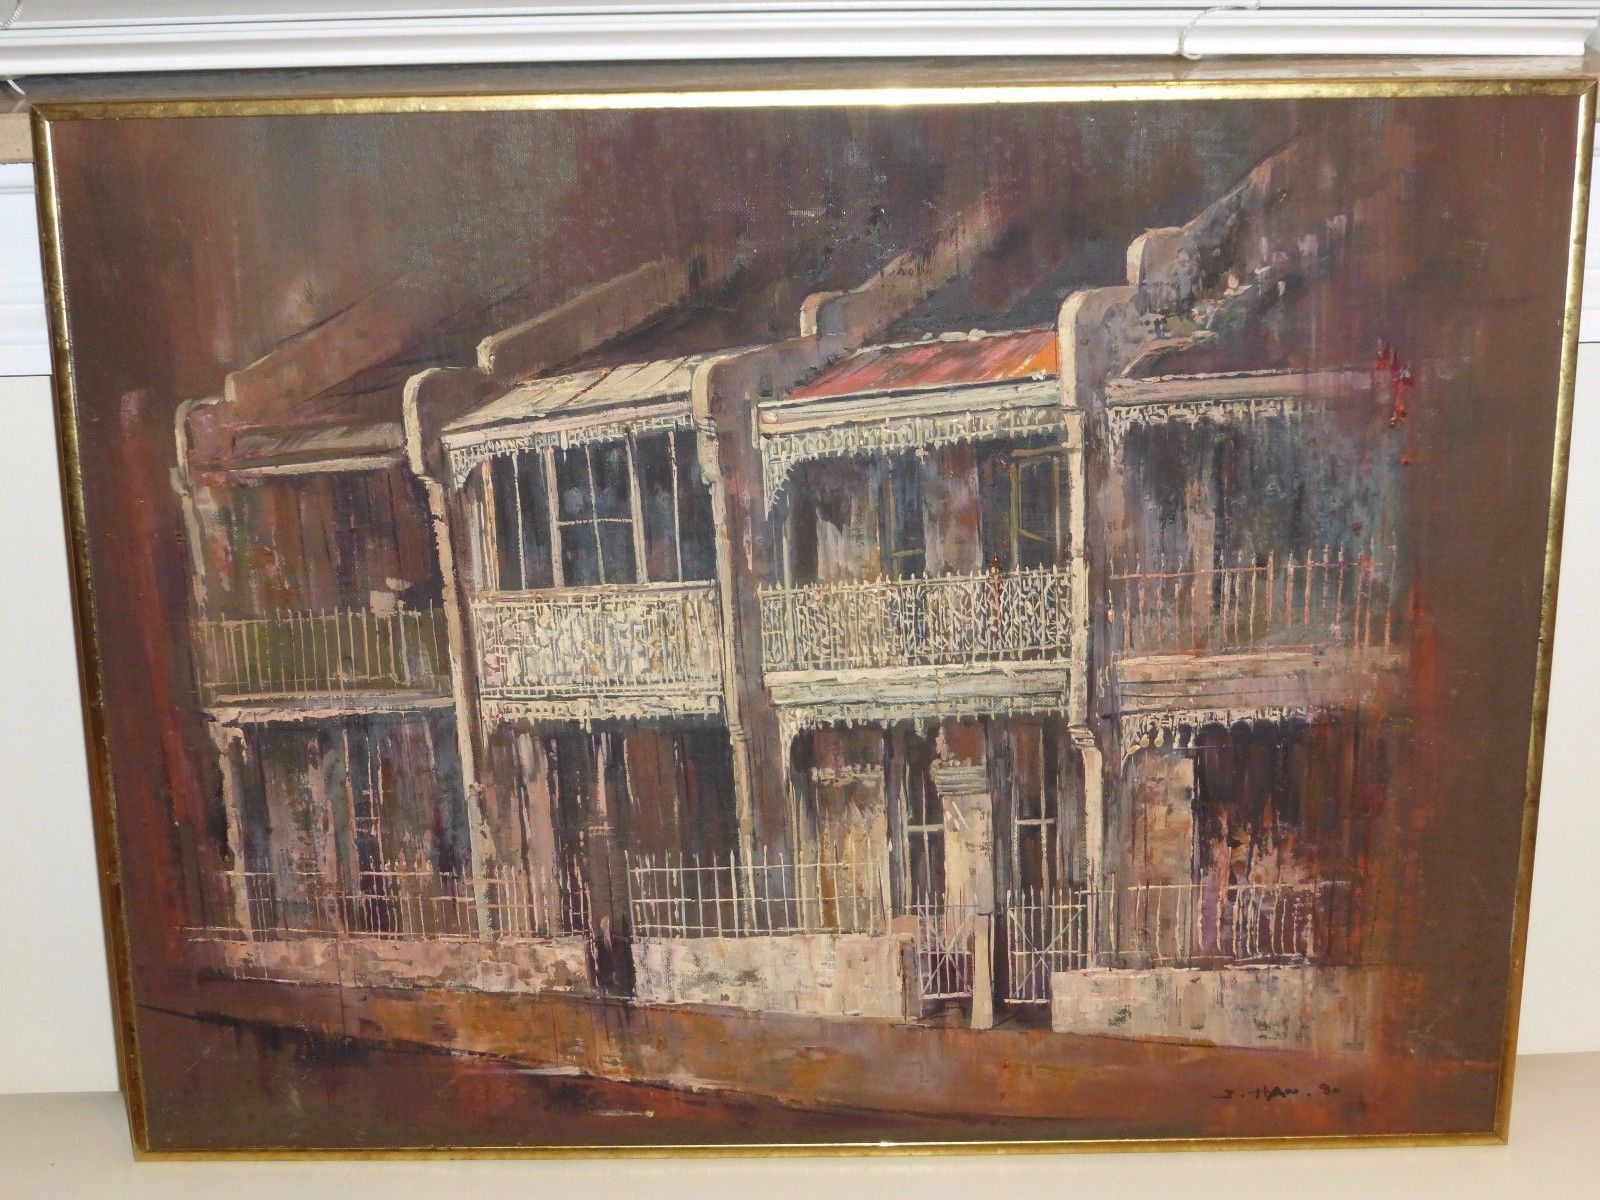 ORIGINAL OIL PALETTE PAINTING ON BOARD SIGNED BY ARTIST 1980 - $1,000.00